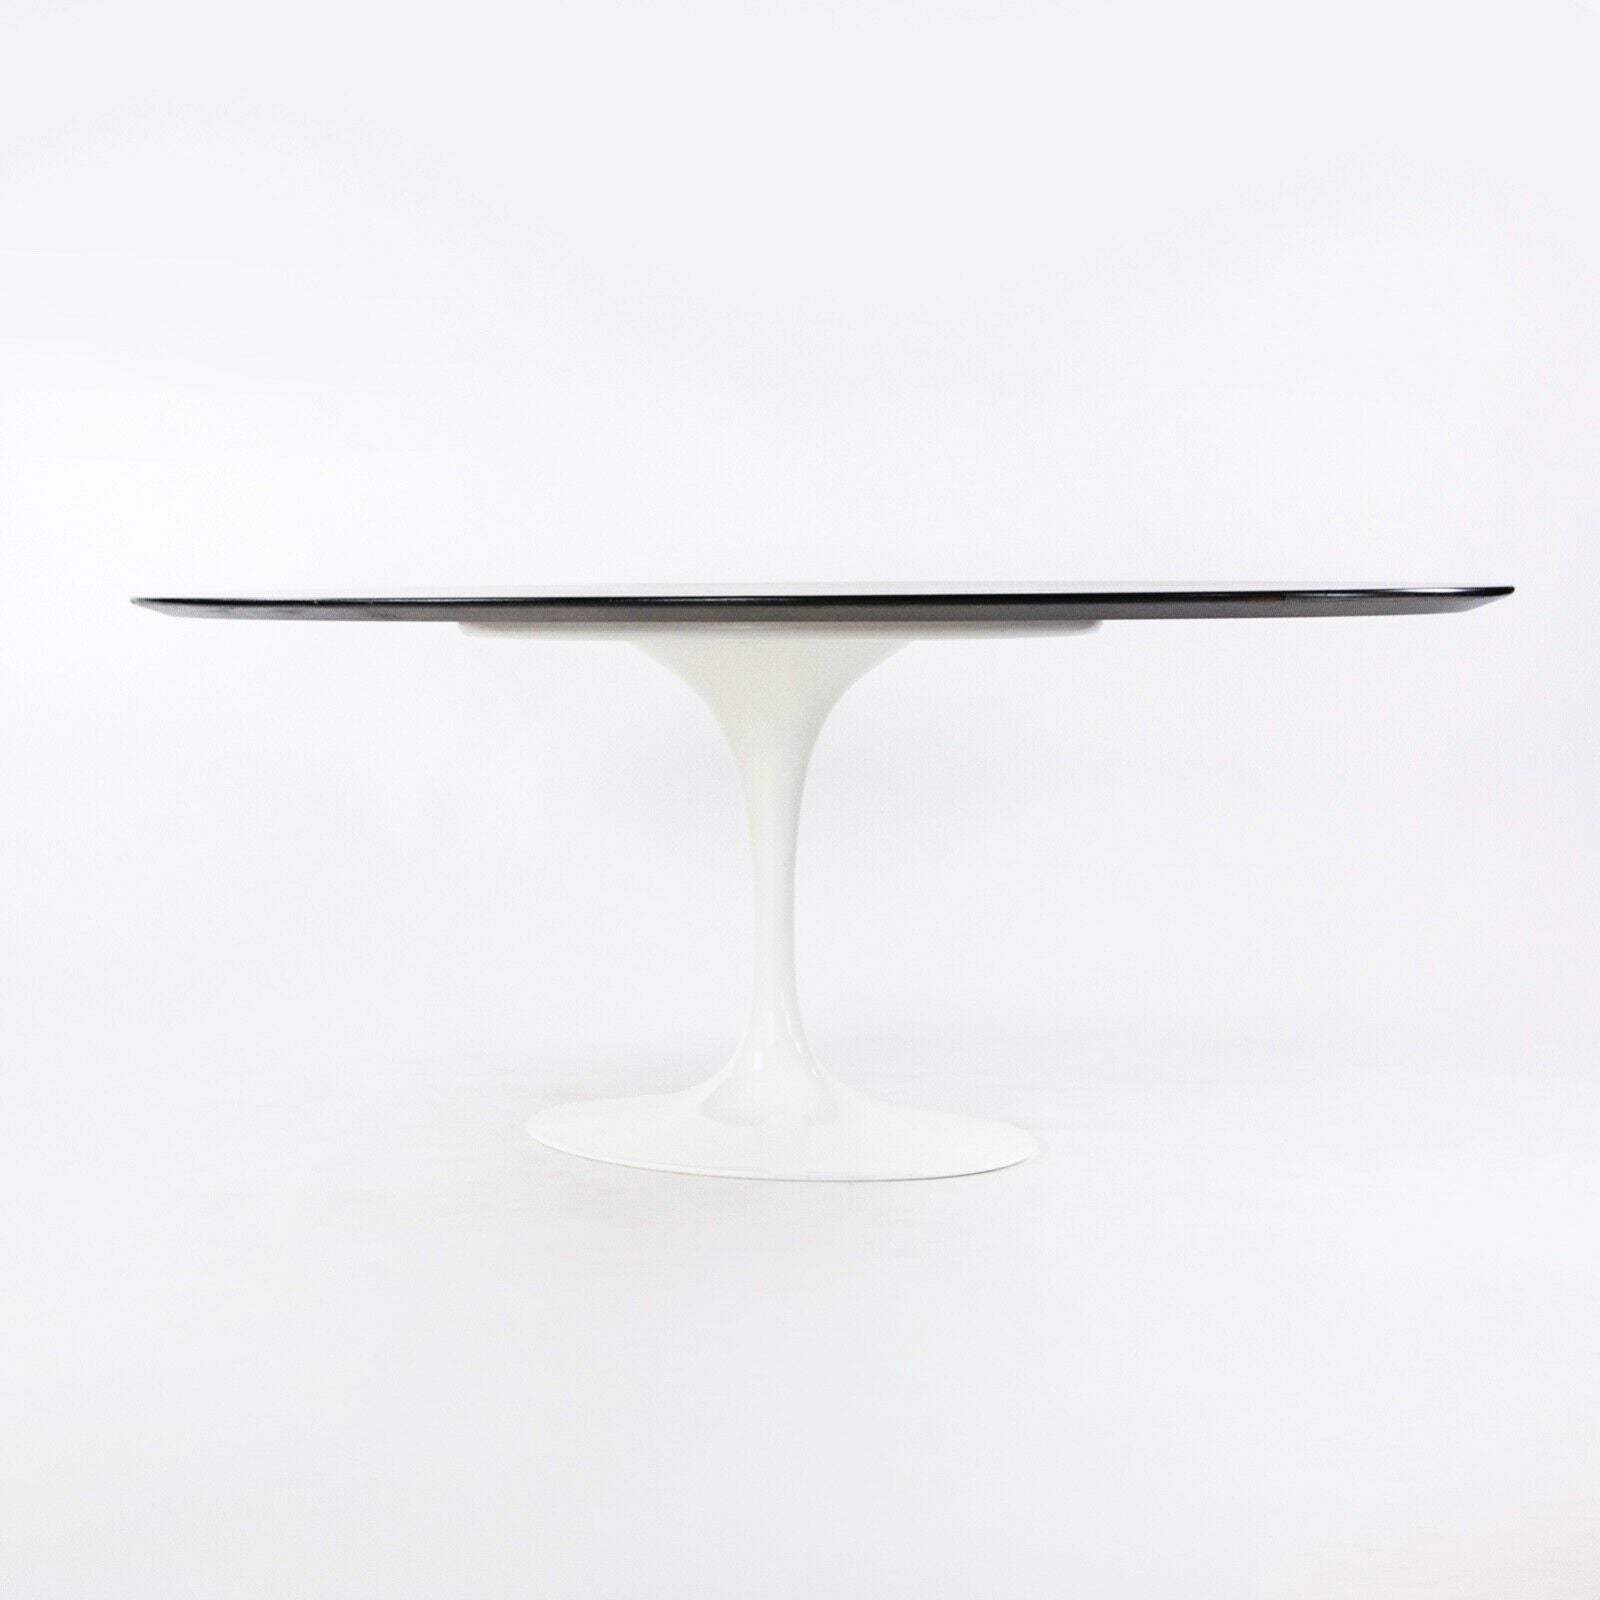 SOLD Eero Saarinen for Knoll 96 inch Tulip Ebonized Oak White Dining Conference Table